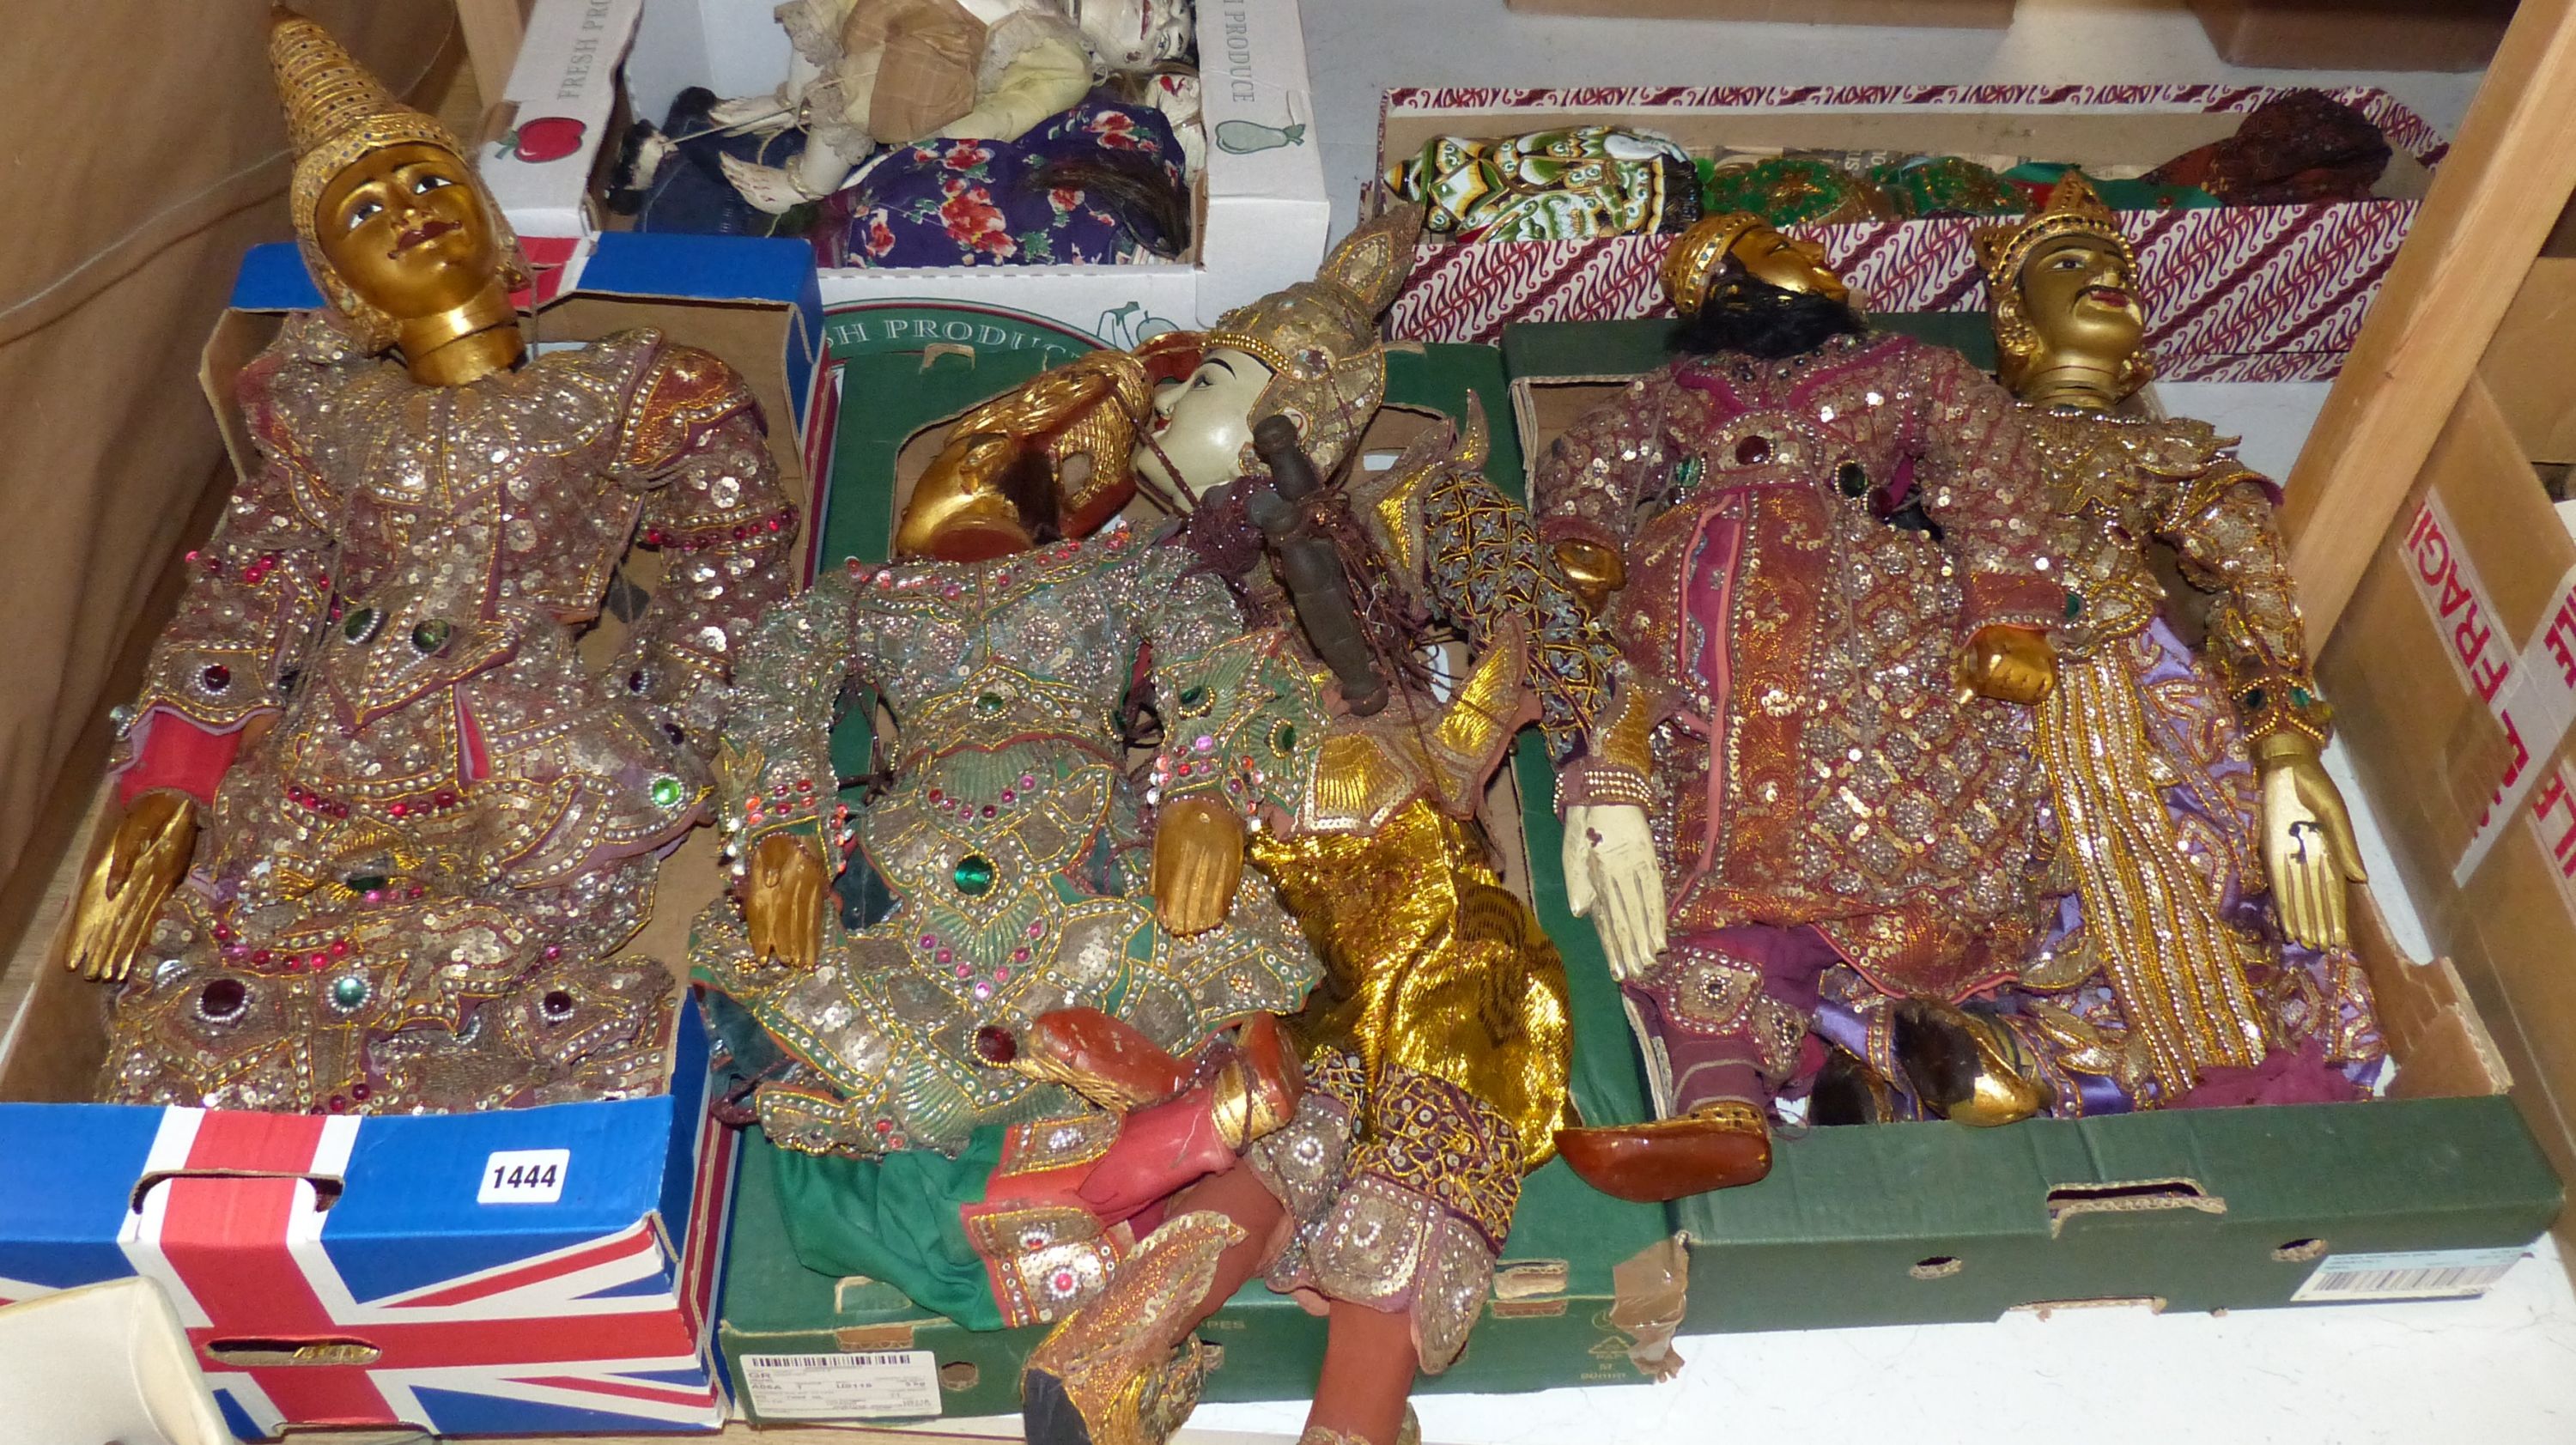 A quantity of Indonesian marionettes